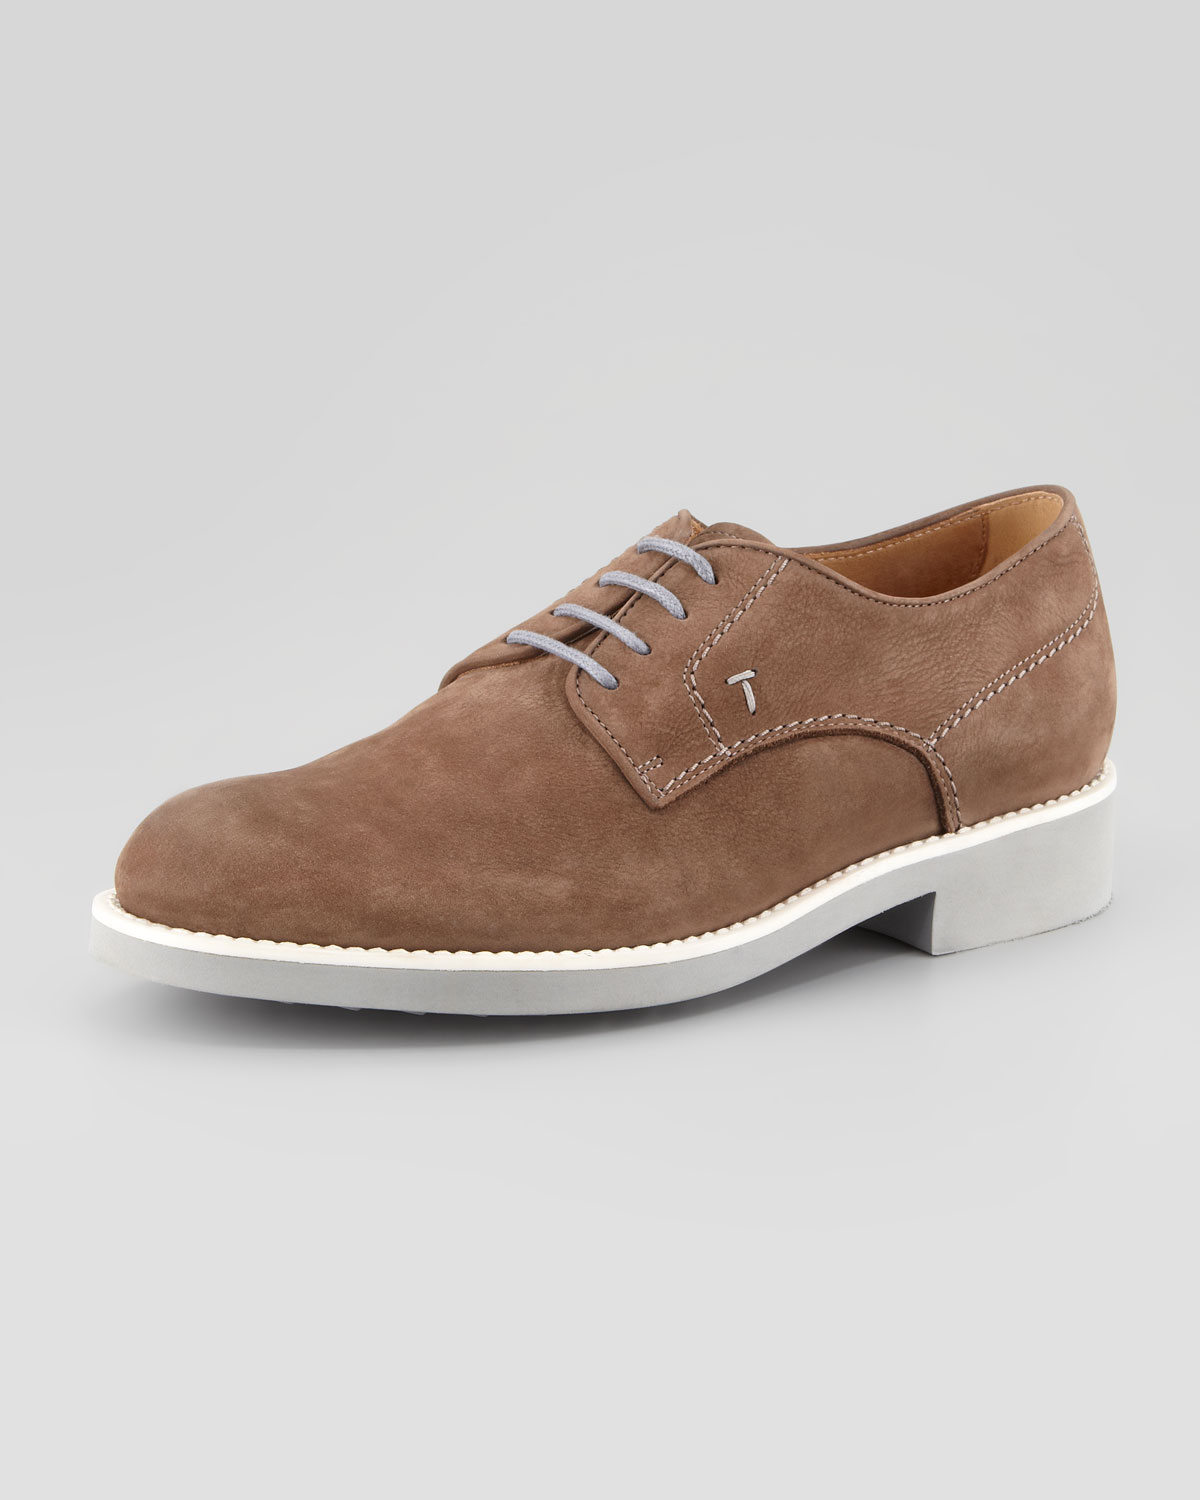 Tod's Suede Derby with White Sole in Brown for Men - Lyst